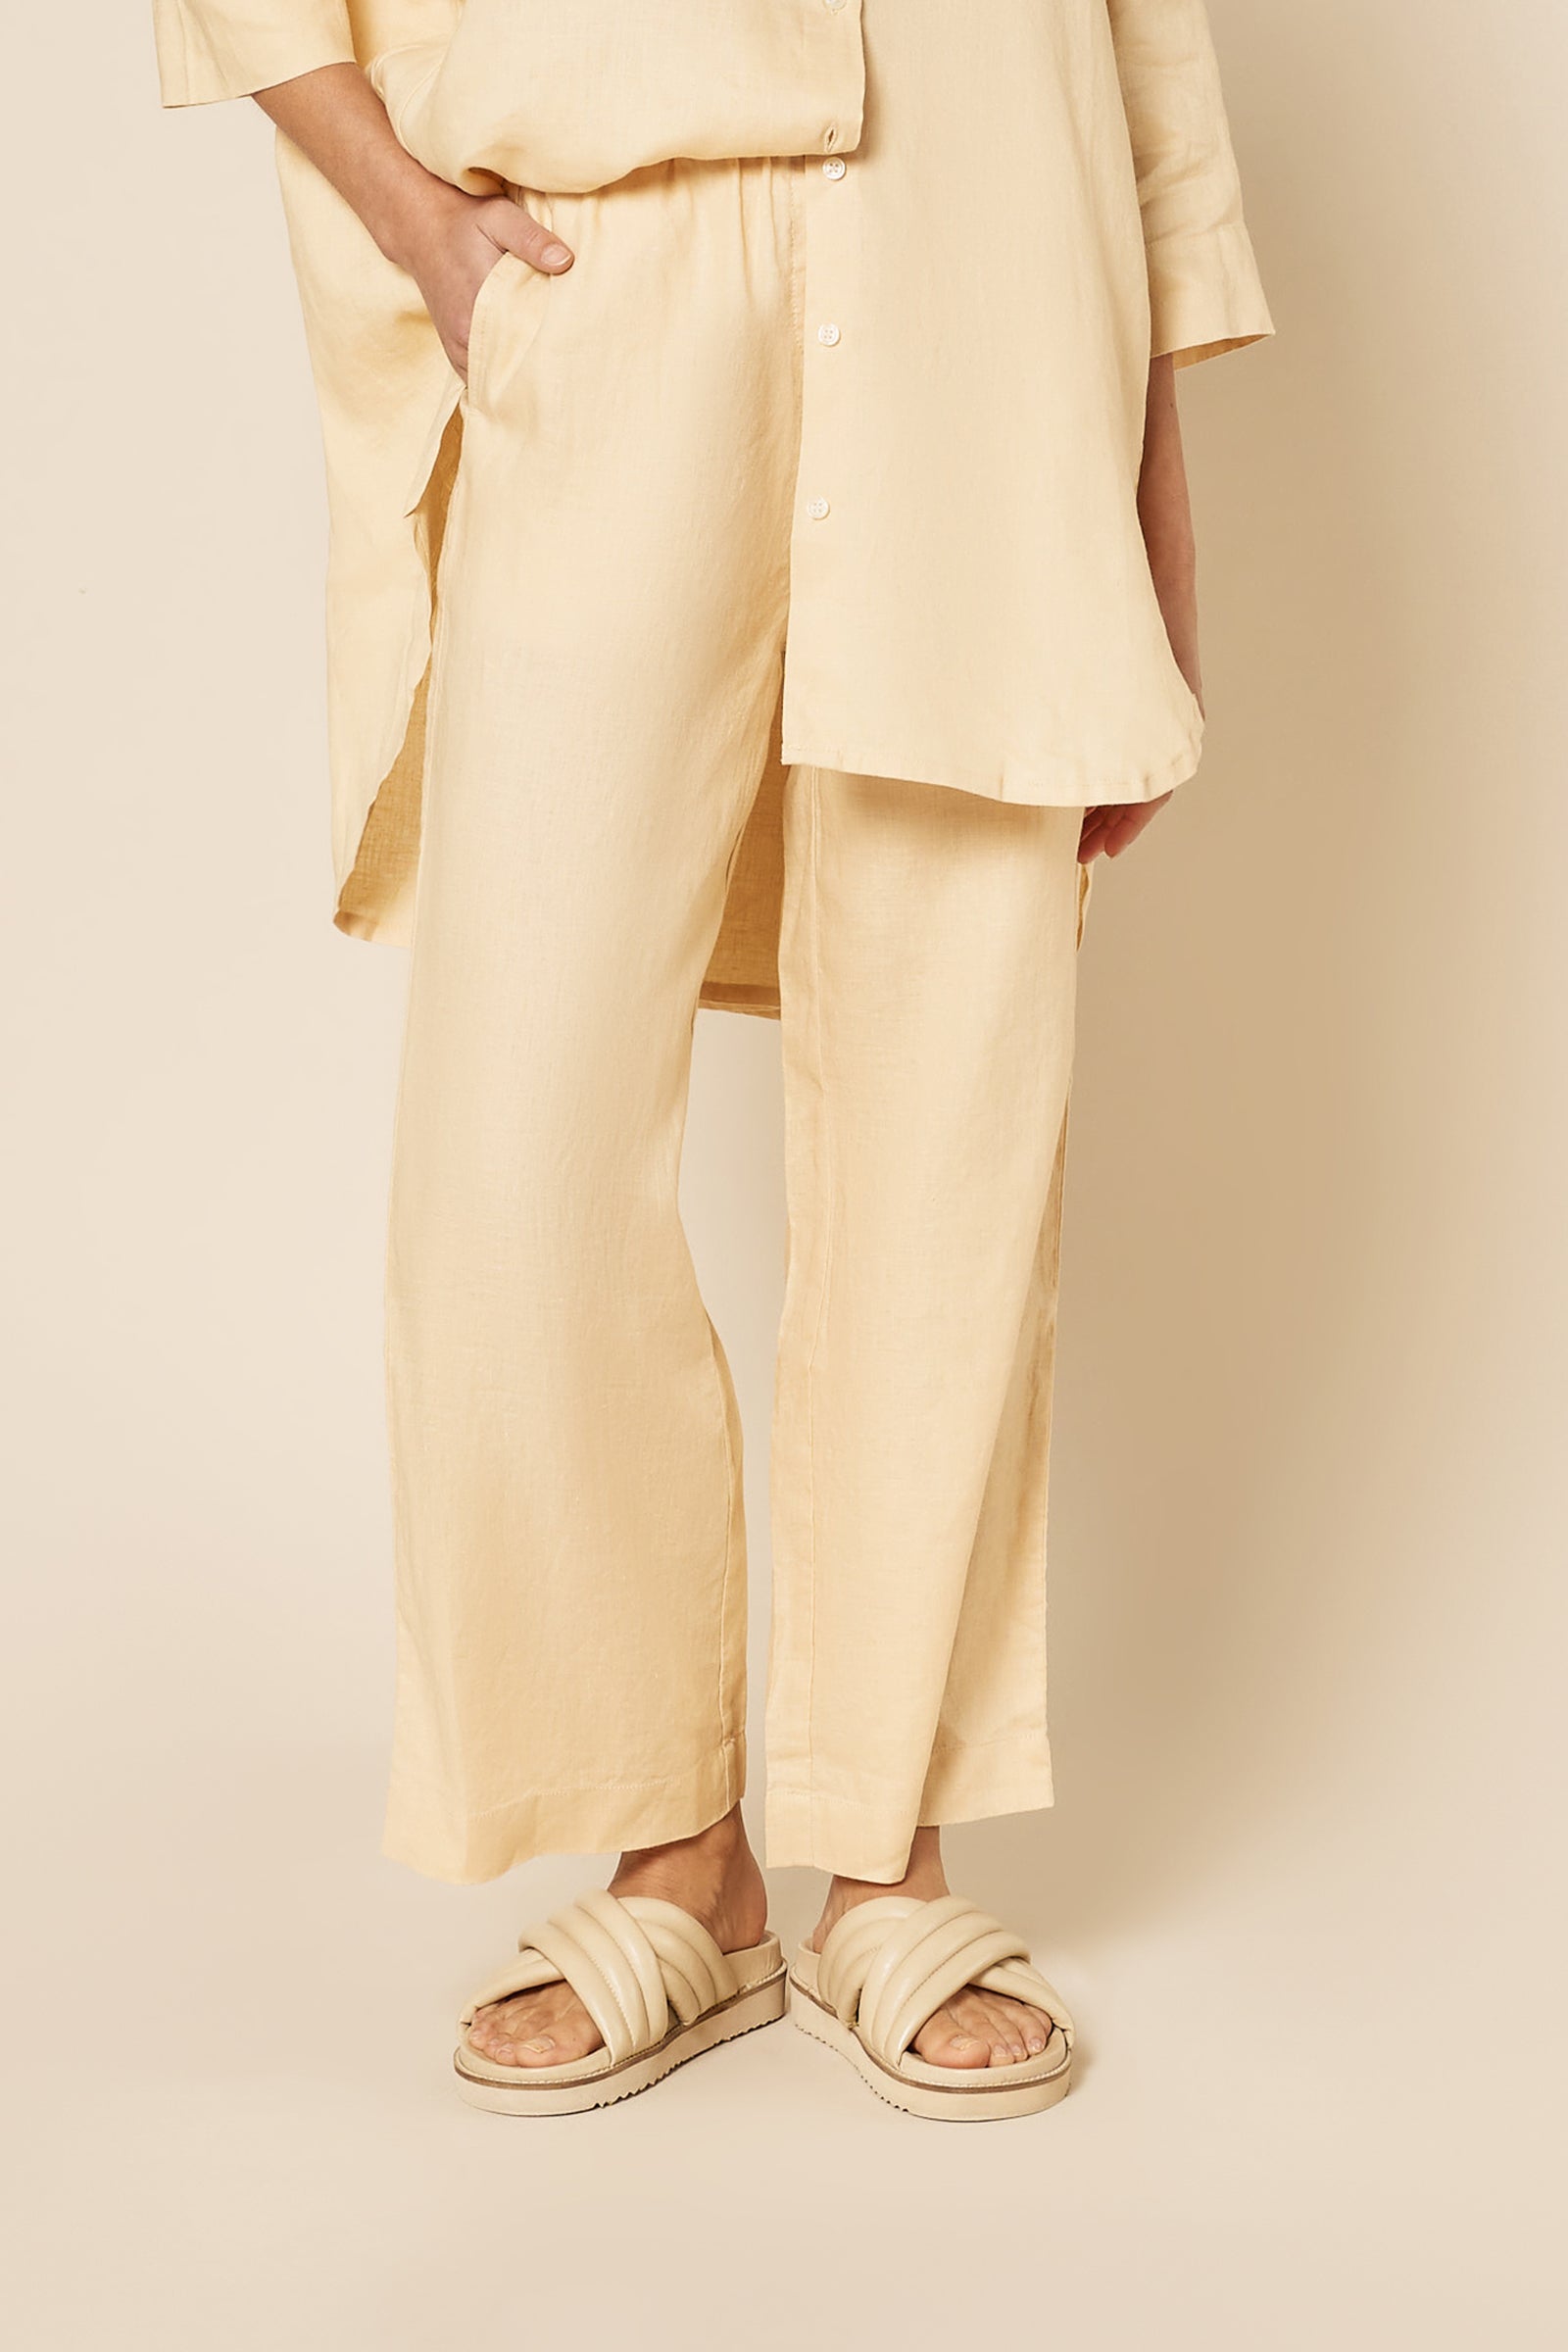 Nude Lucy Lounge Linen Crop Pant In a Light Brown Butter Colour 